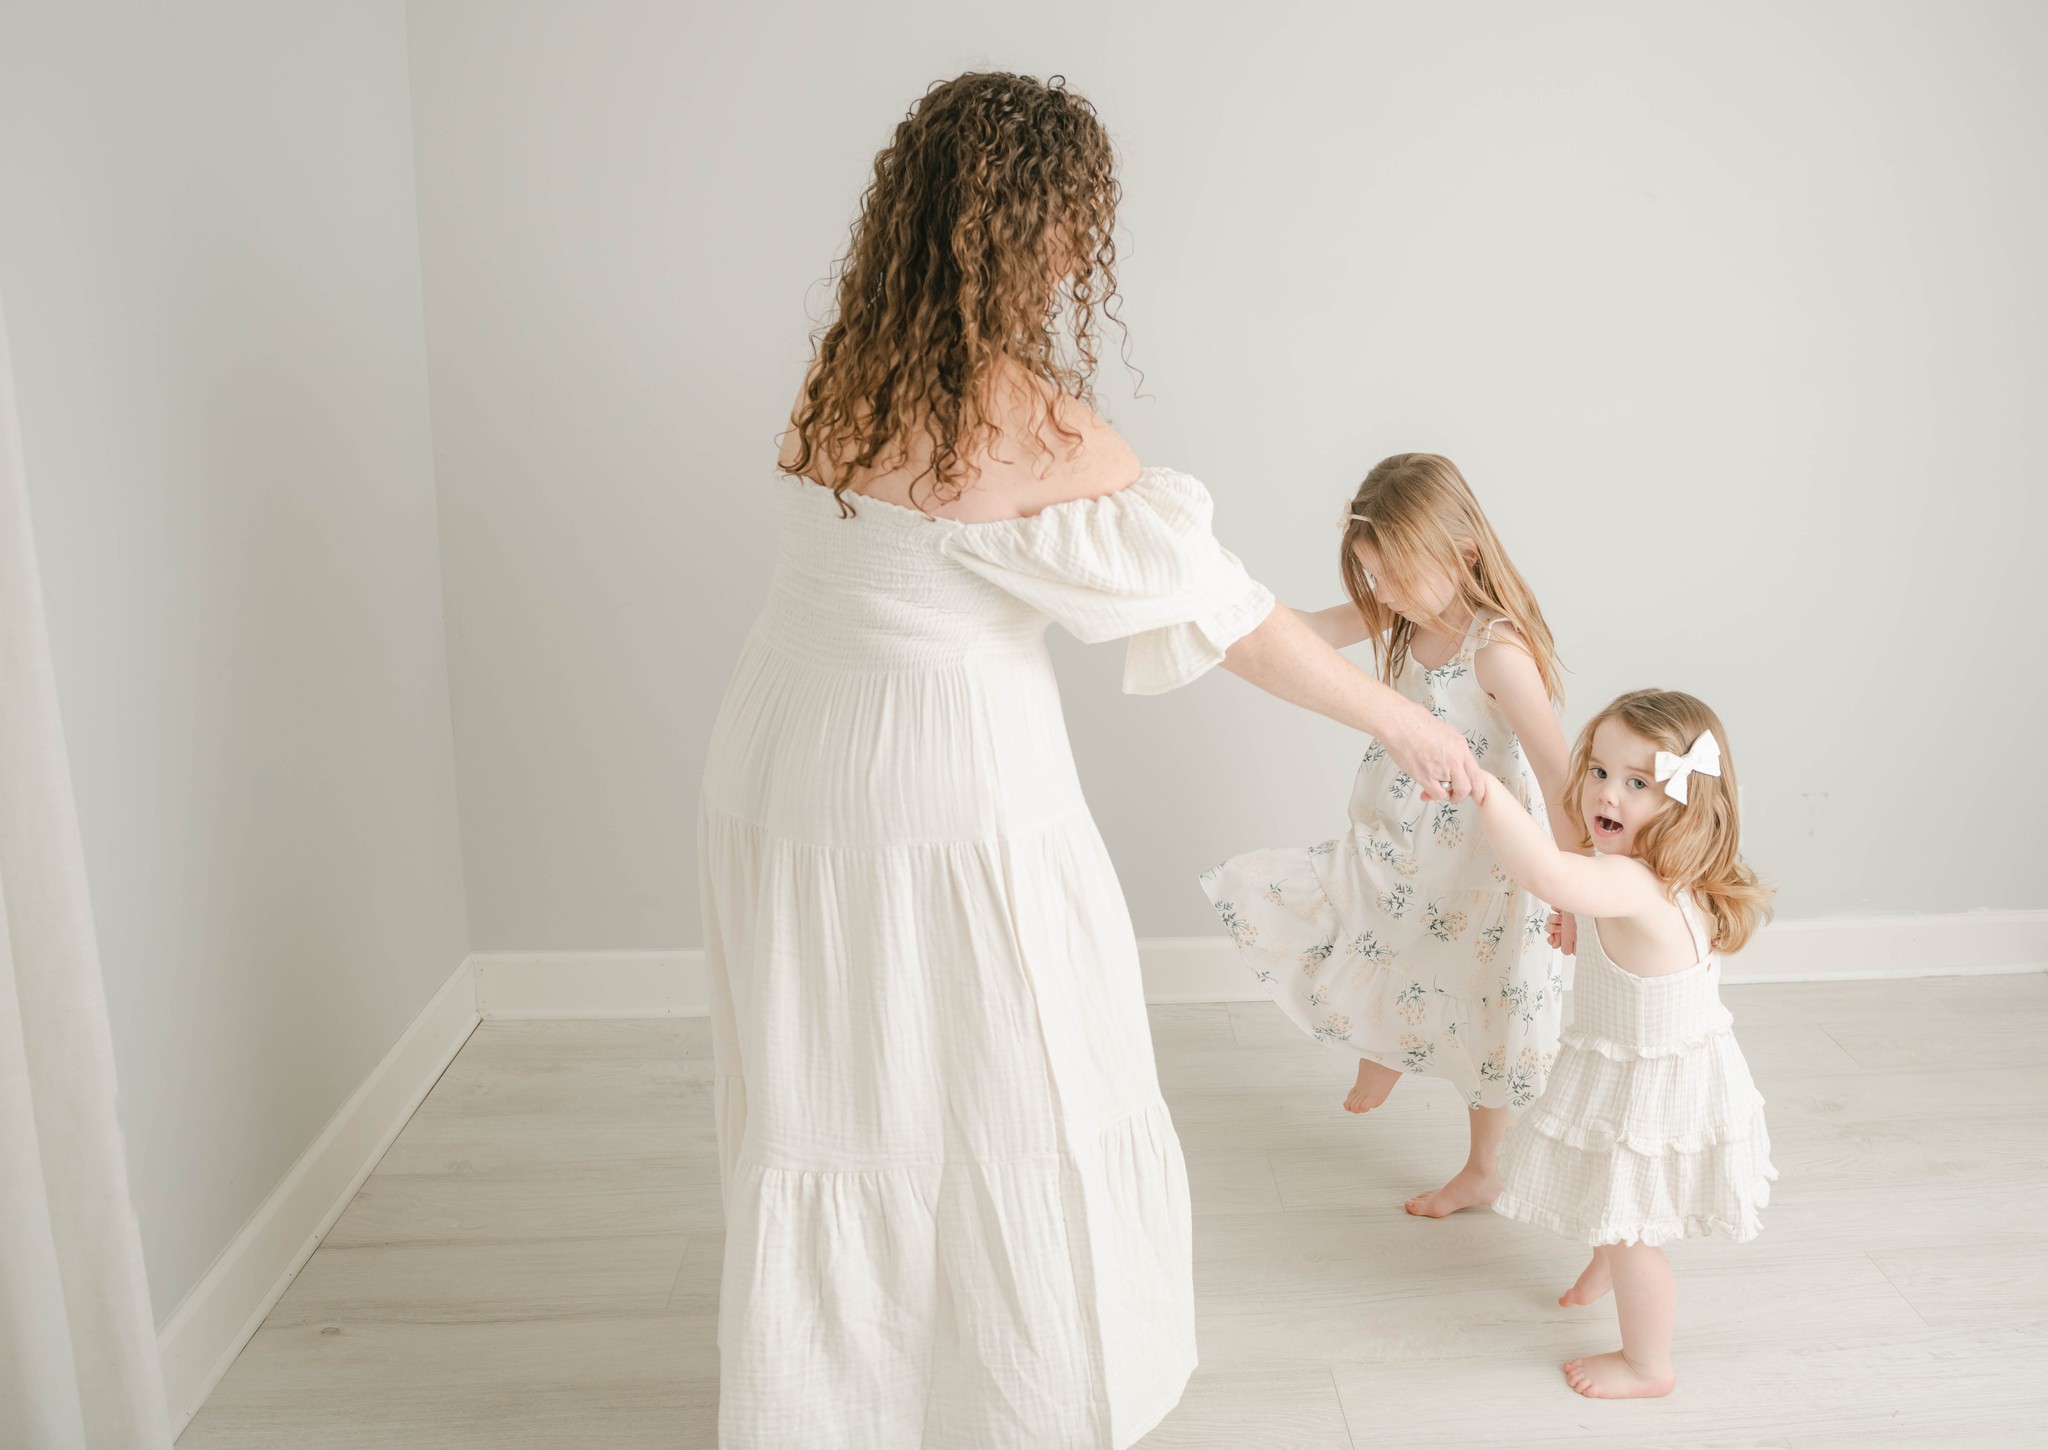 A mother dances while holding hands with her two young daughters